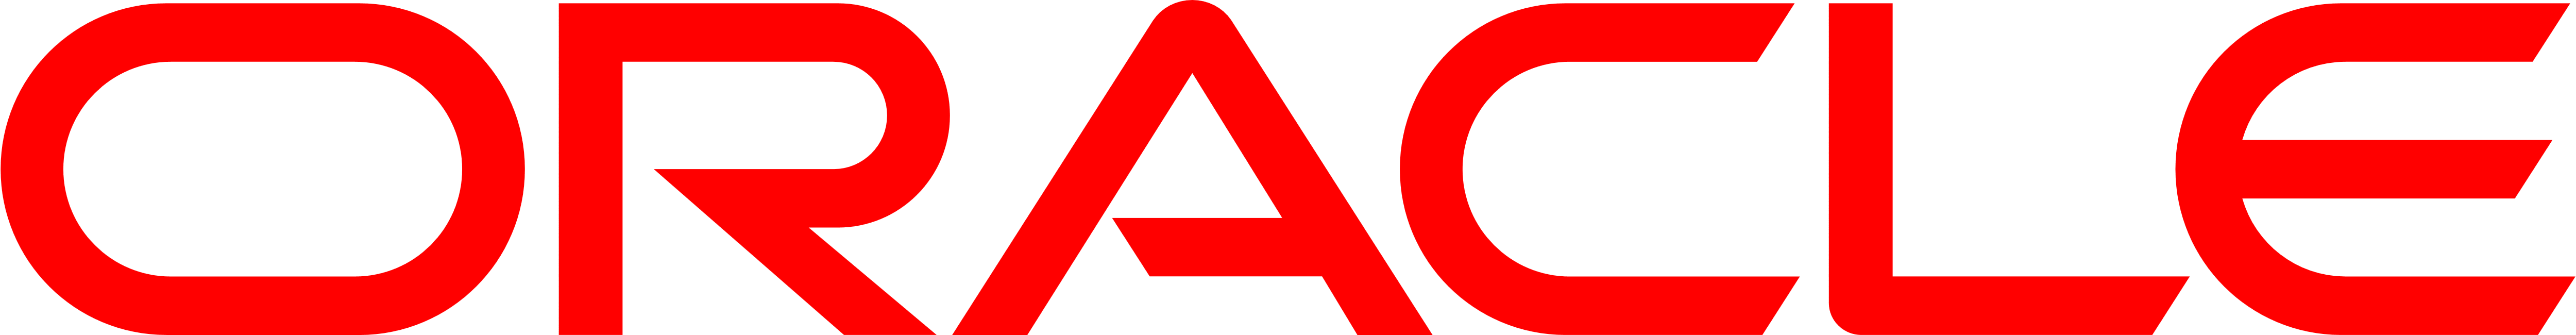 Logo of Oracle software